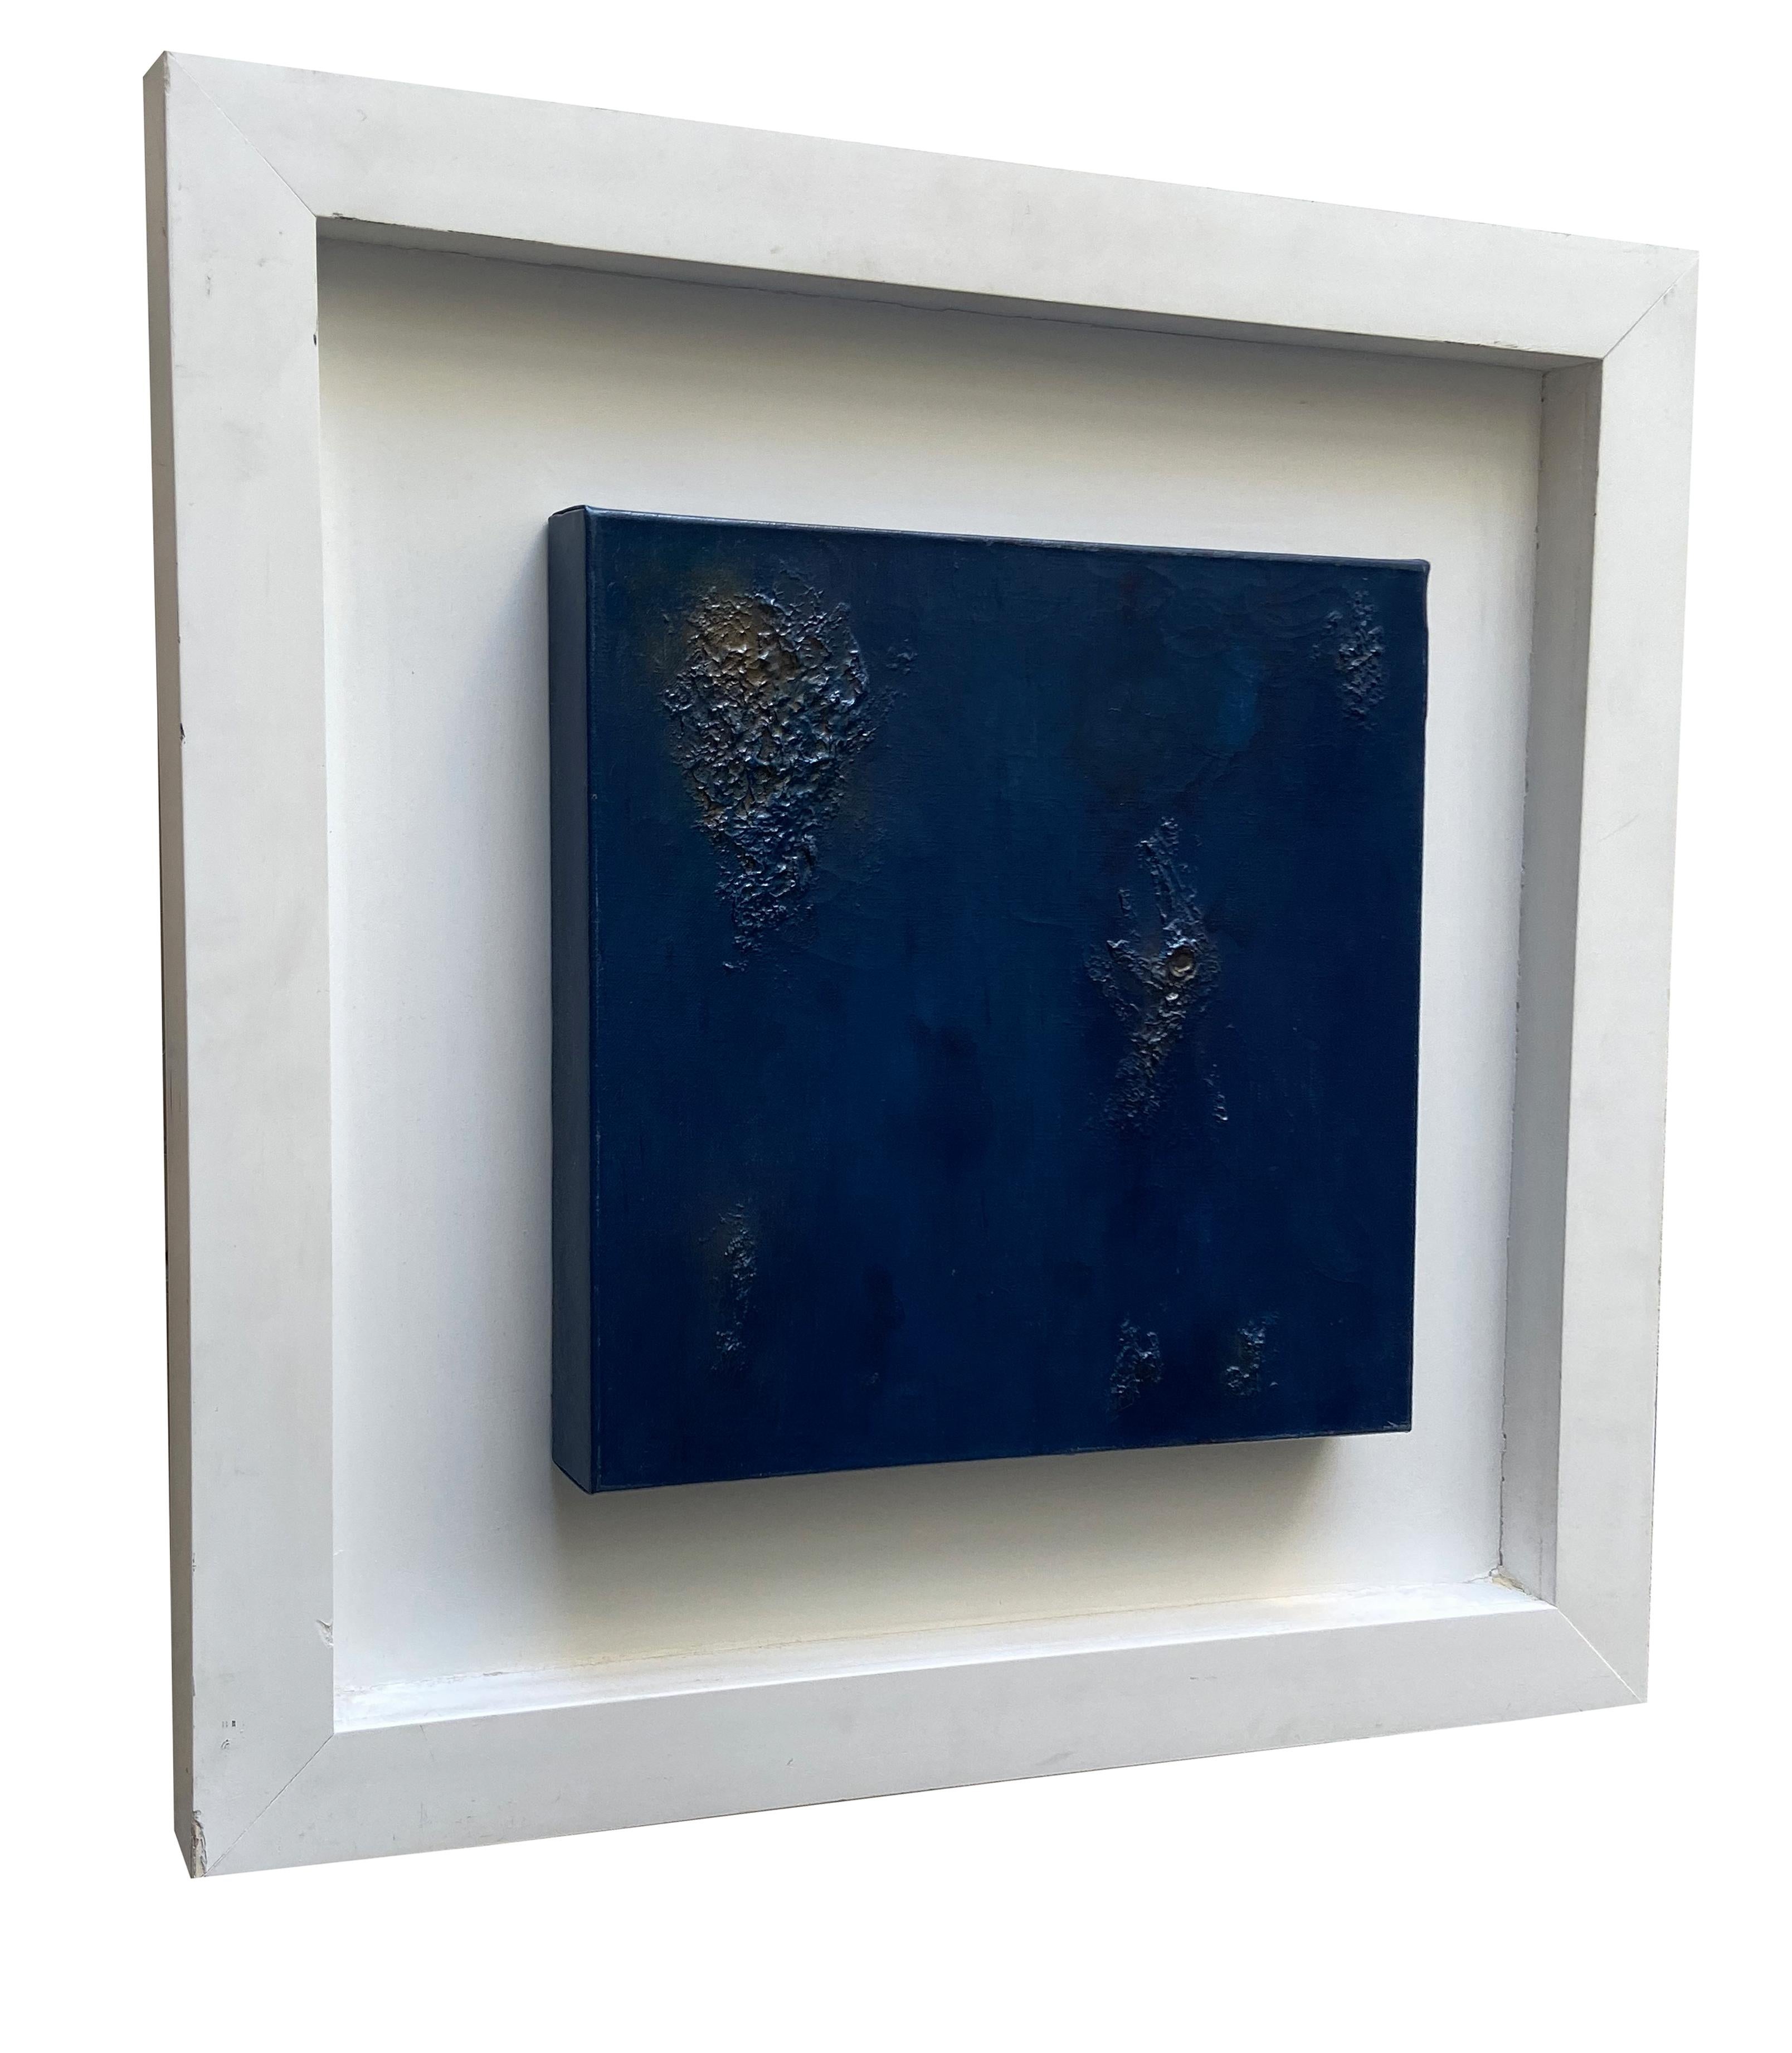 DEEP BLUE EMOTION - Mixed media on canvas cm.40x40 by Massimo Caiafa, Italy 2016. White laquered wooden frame cm. 70x70